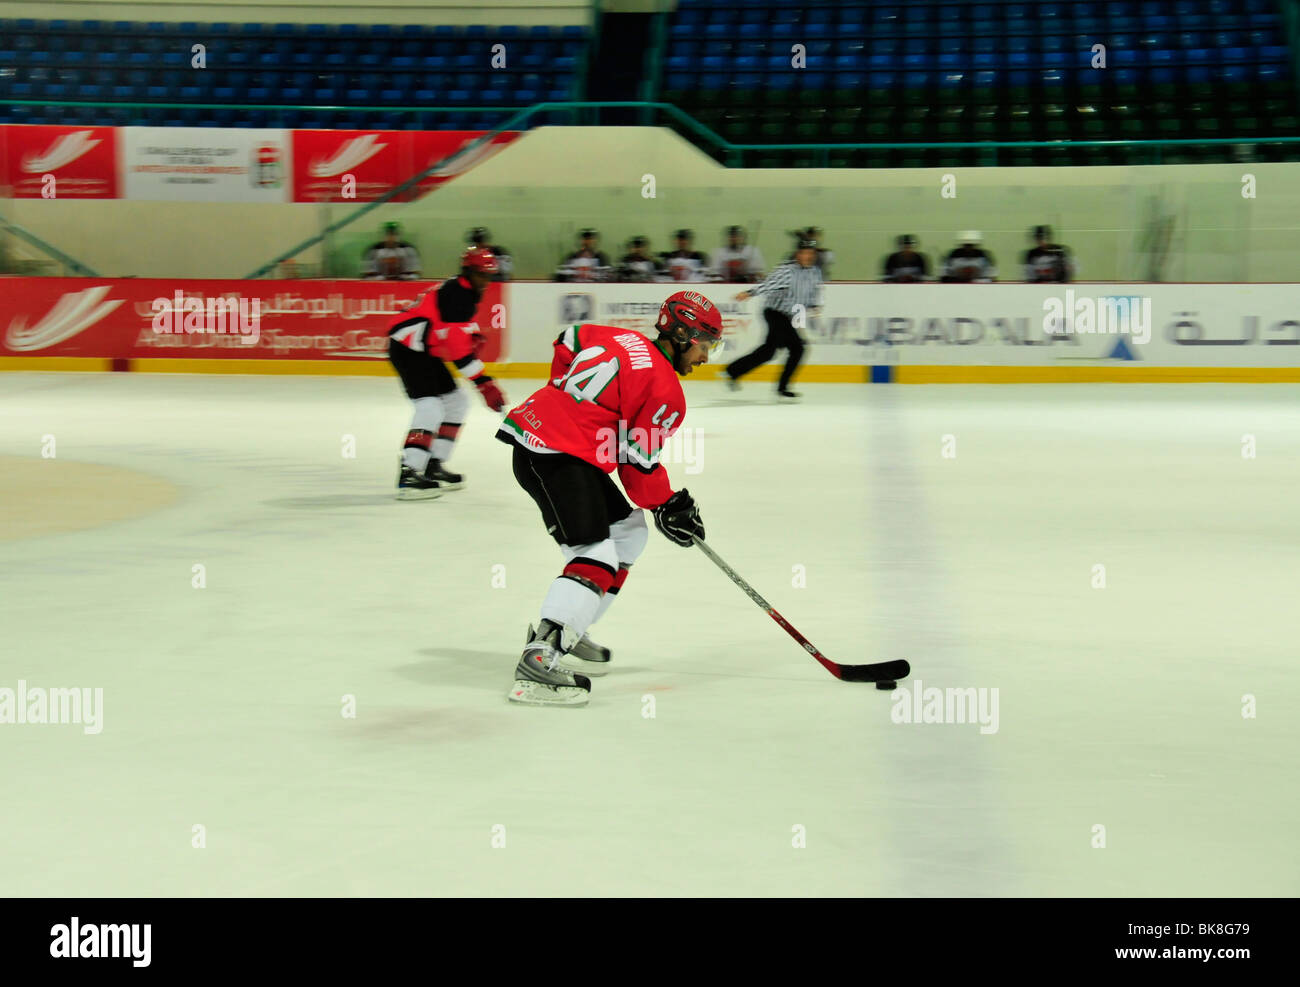 Hockey game of the Abu Dhabi Scorpions against the national team of the United Arab Emirates in the ice hockey stadium, ice rin Stock Photo